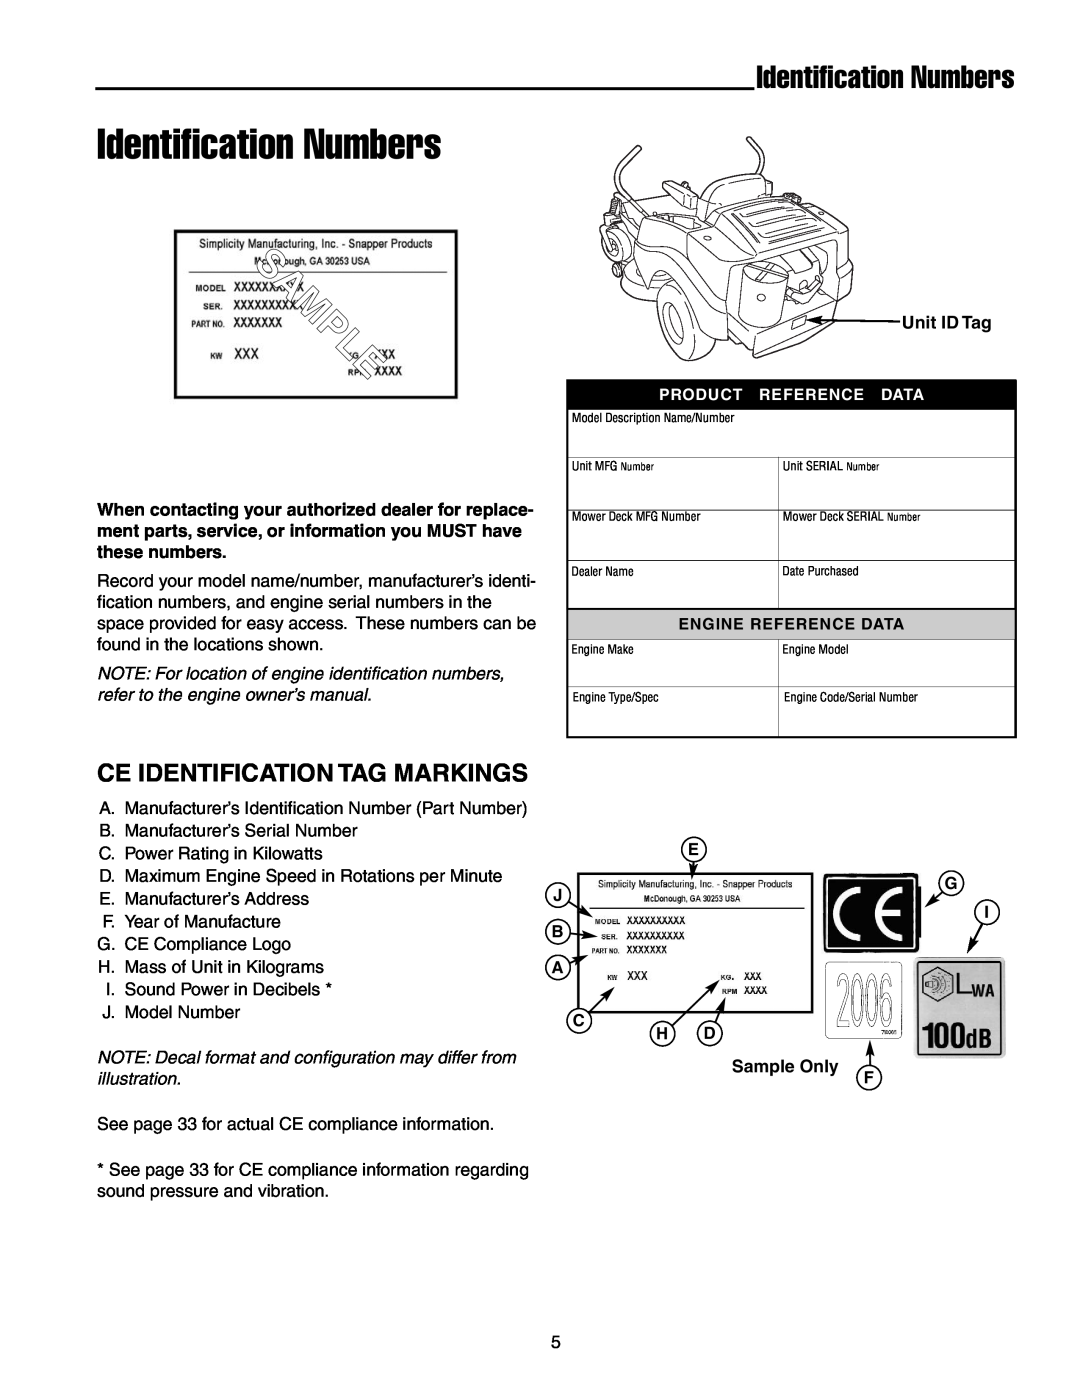 Snapper ERZT20441BVE2 manual Identification Numbers, Ce Identification Tag Markings 